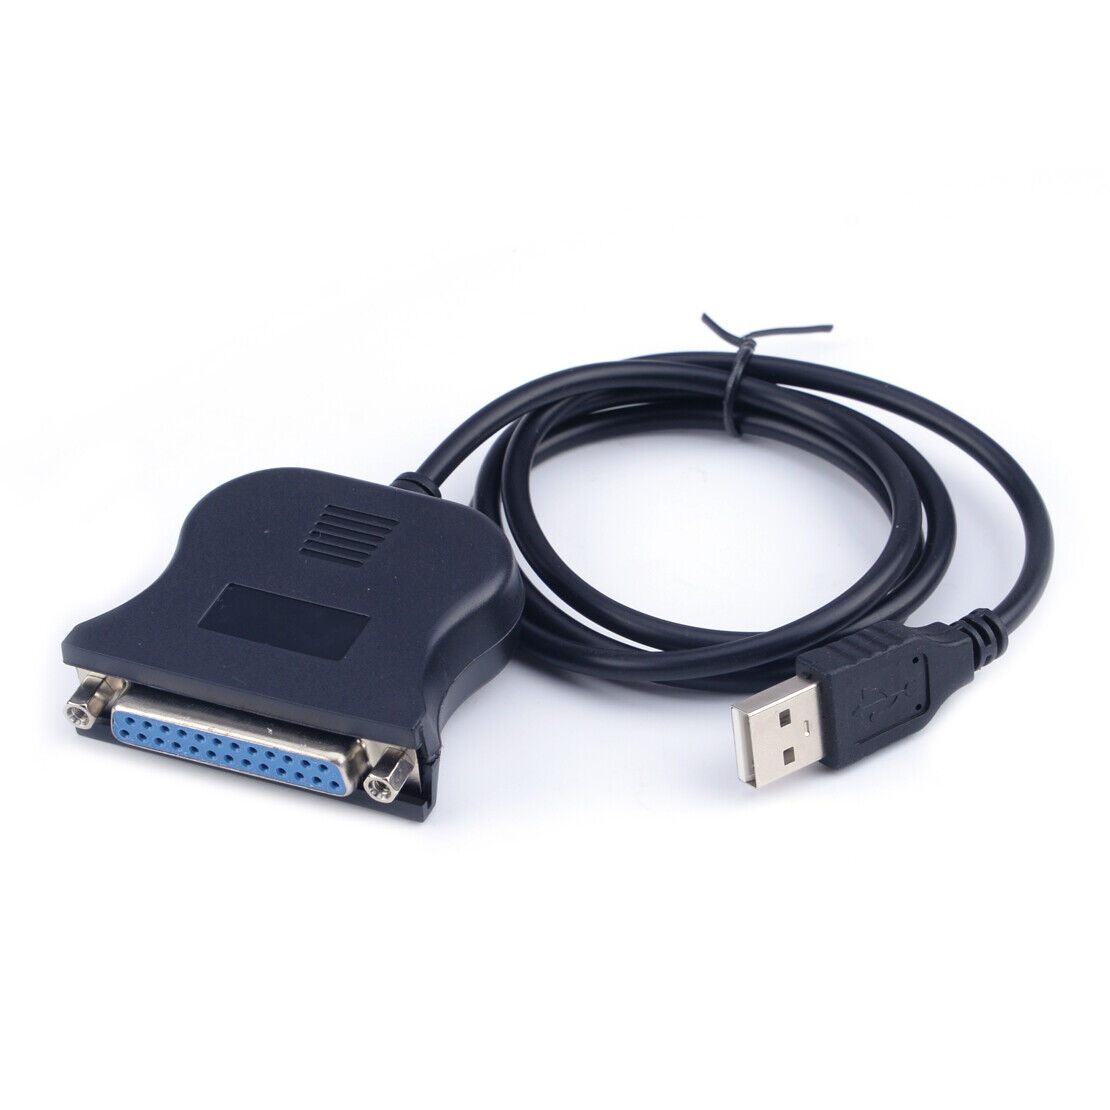 px-usb adapter compatible with windows 98